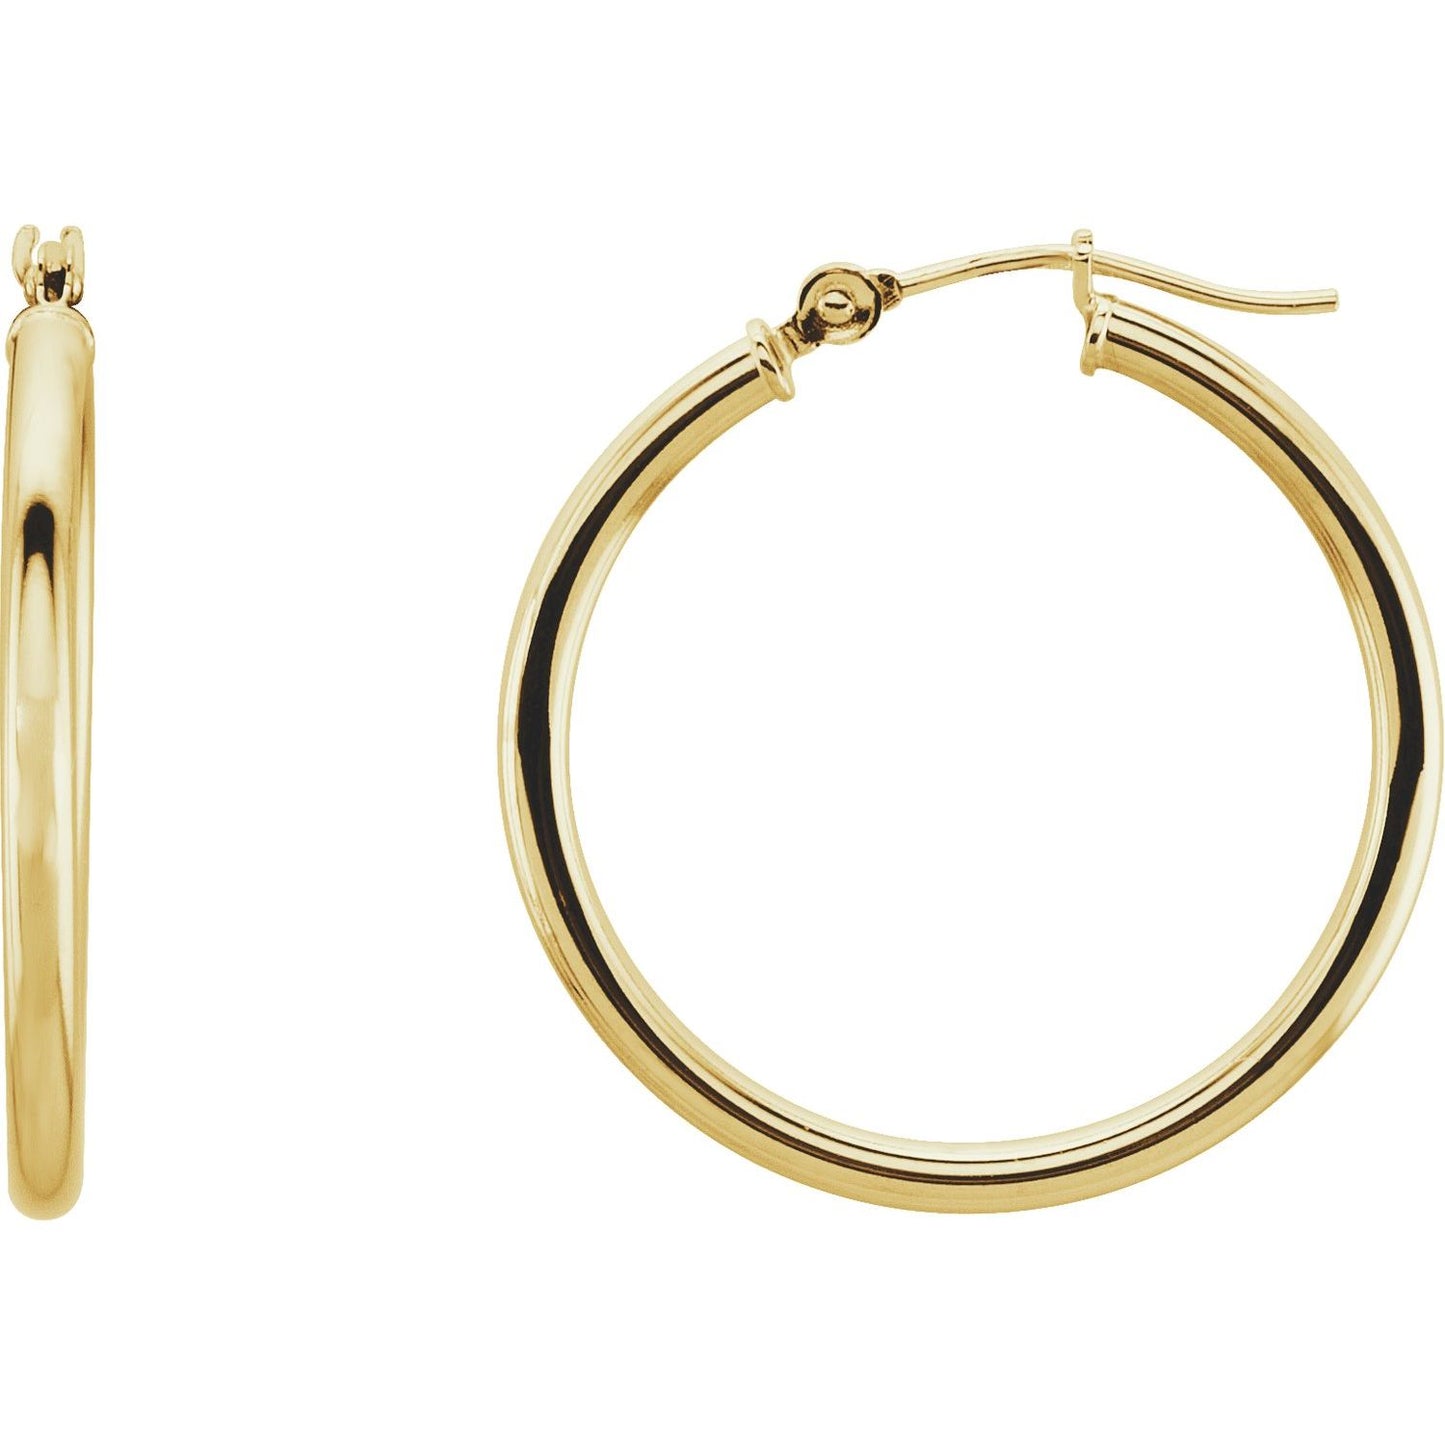 Gold Hoops - Large